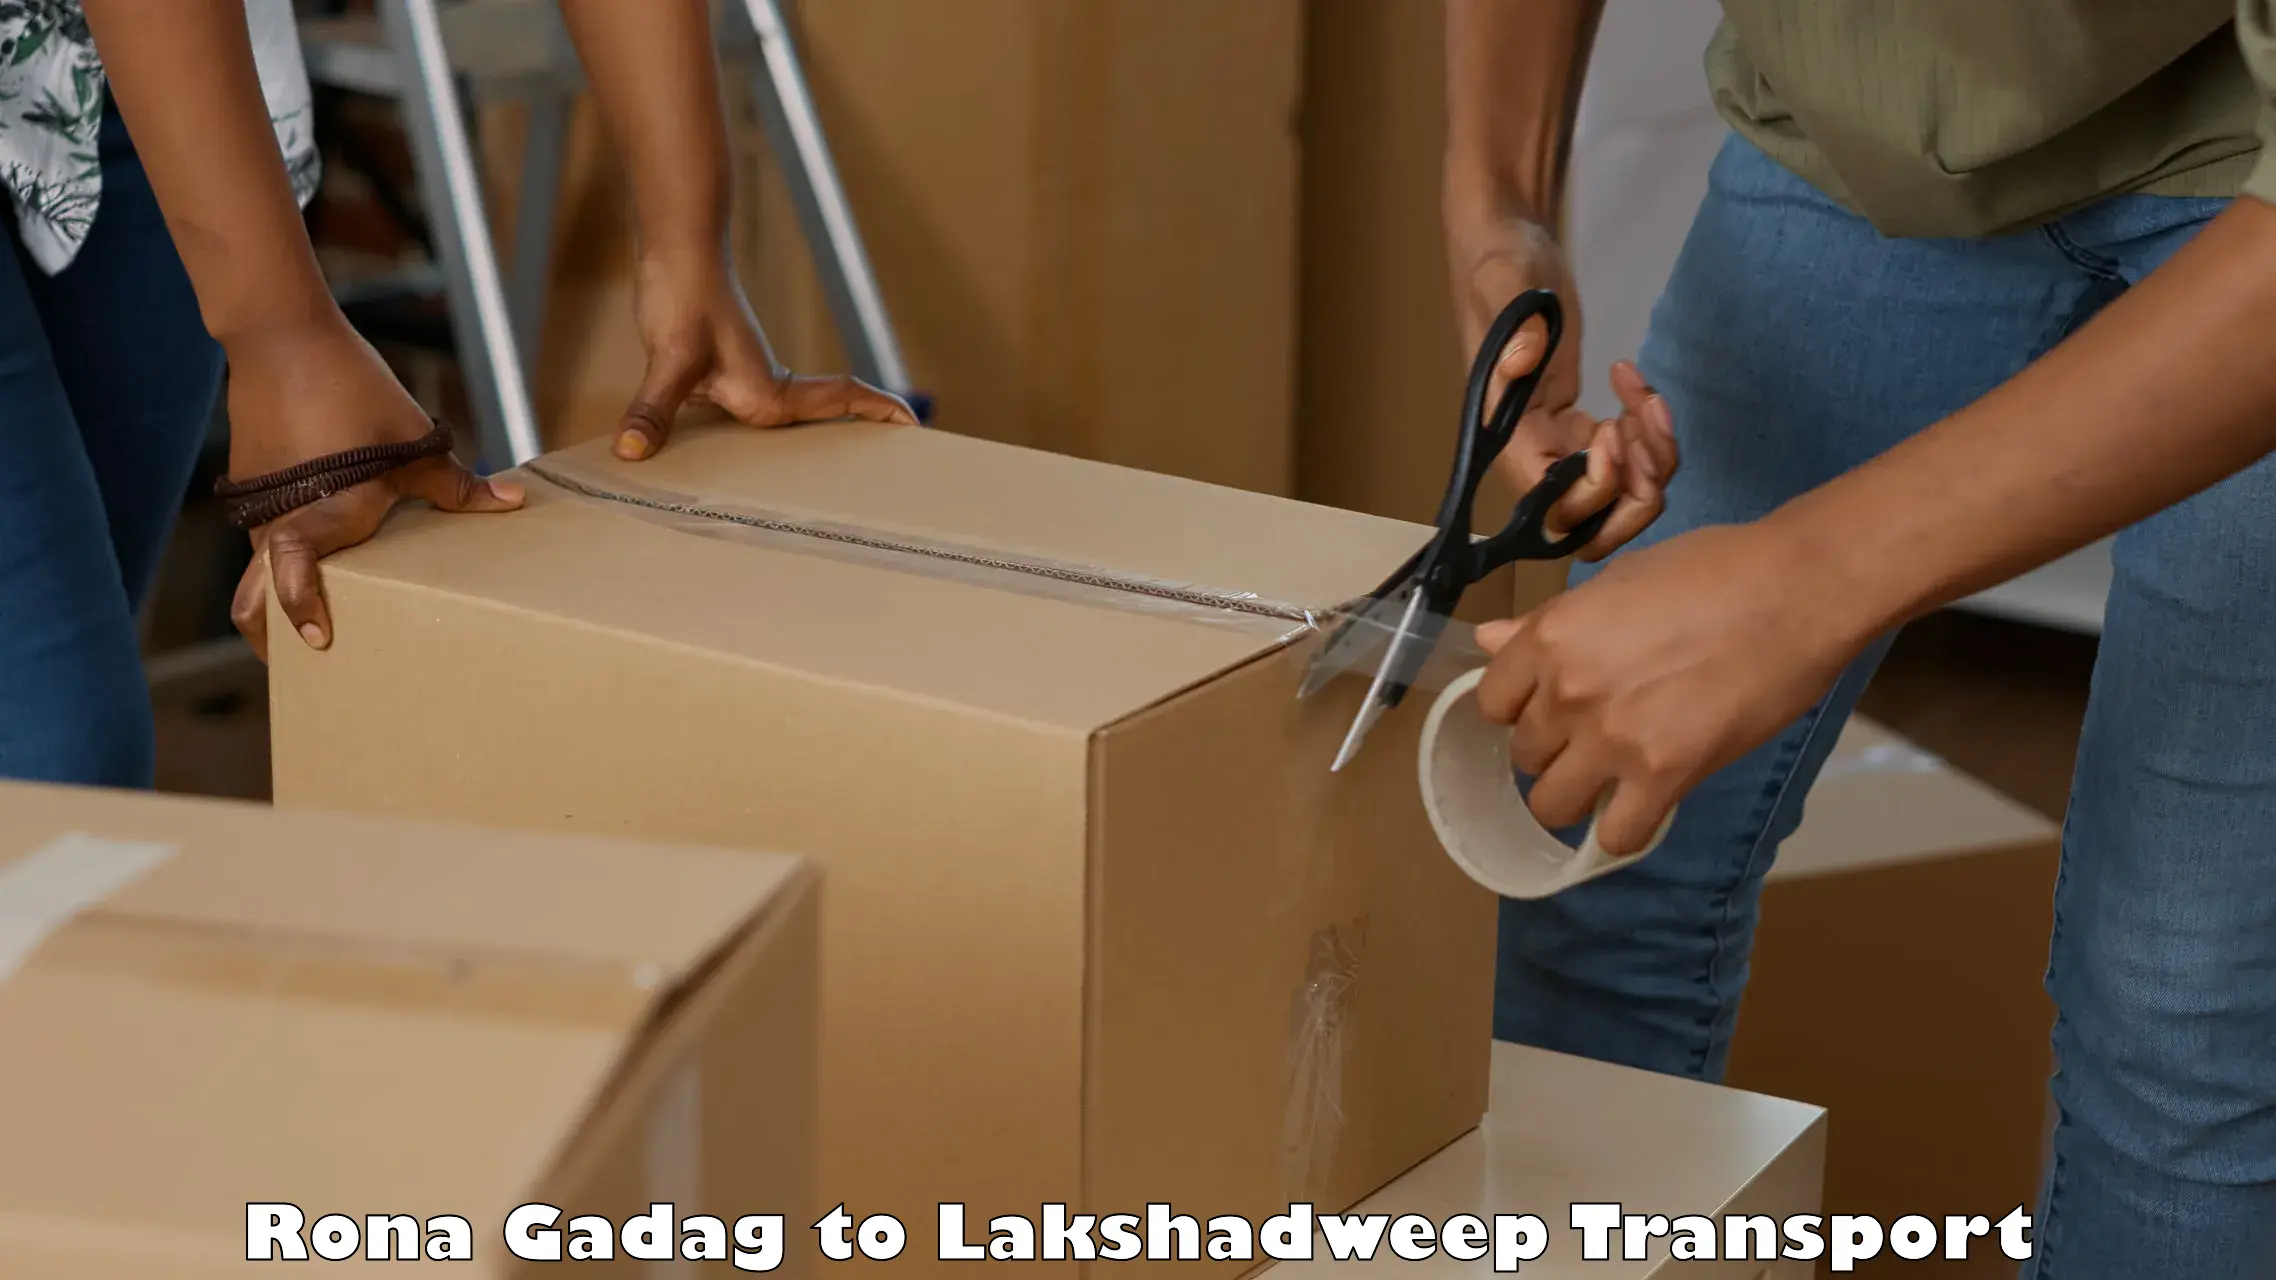 Nationwide transport services Rona Gadag to Lakshadweep